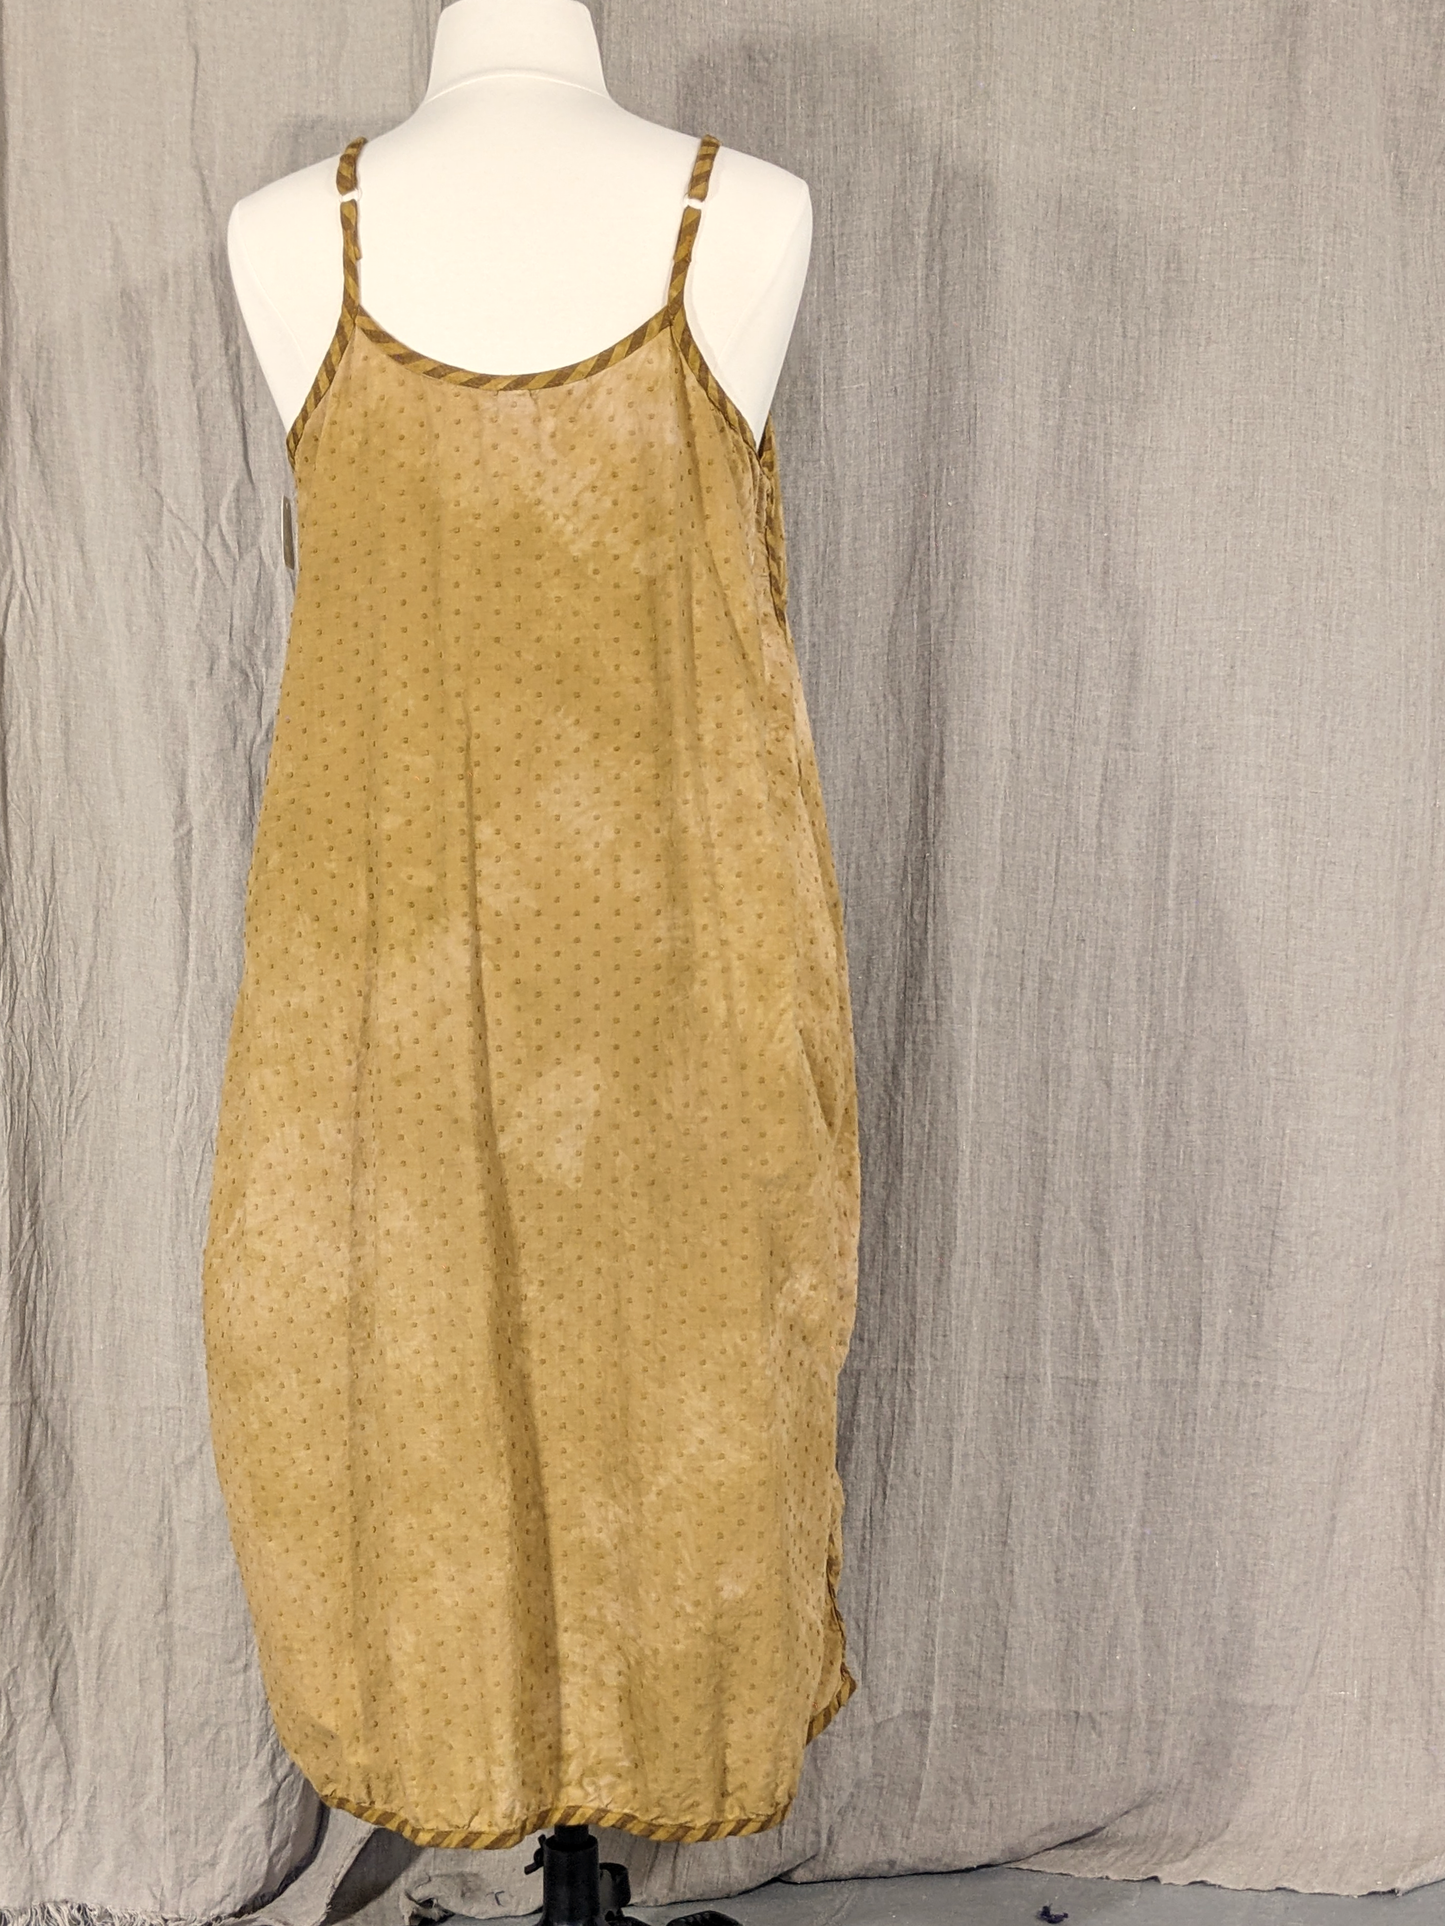 dotted/striped slipdress in antique ochre